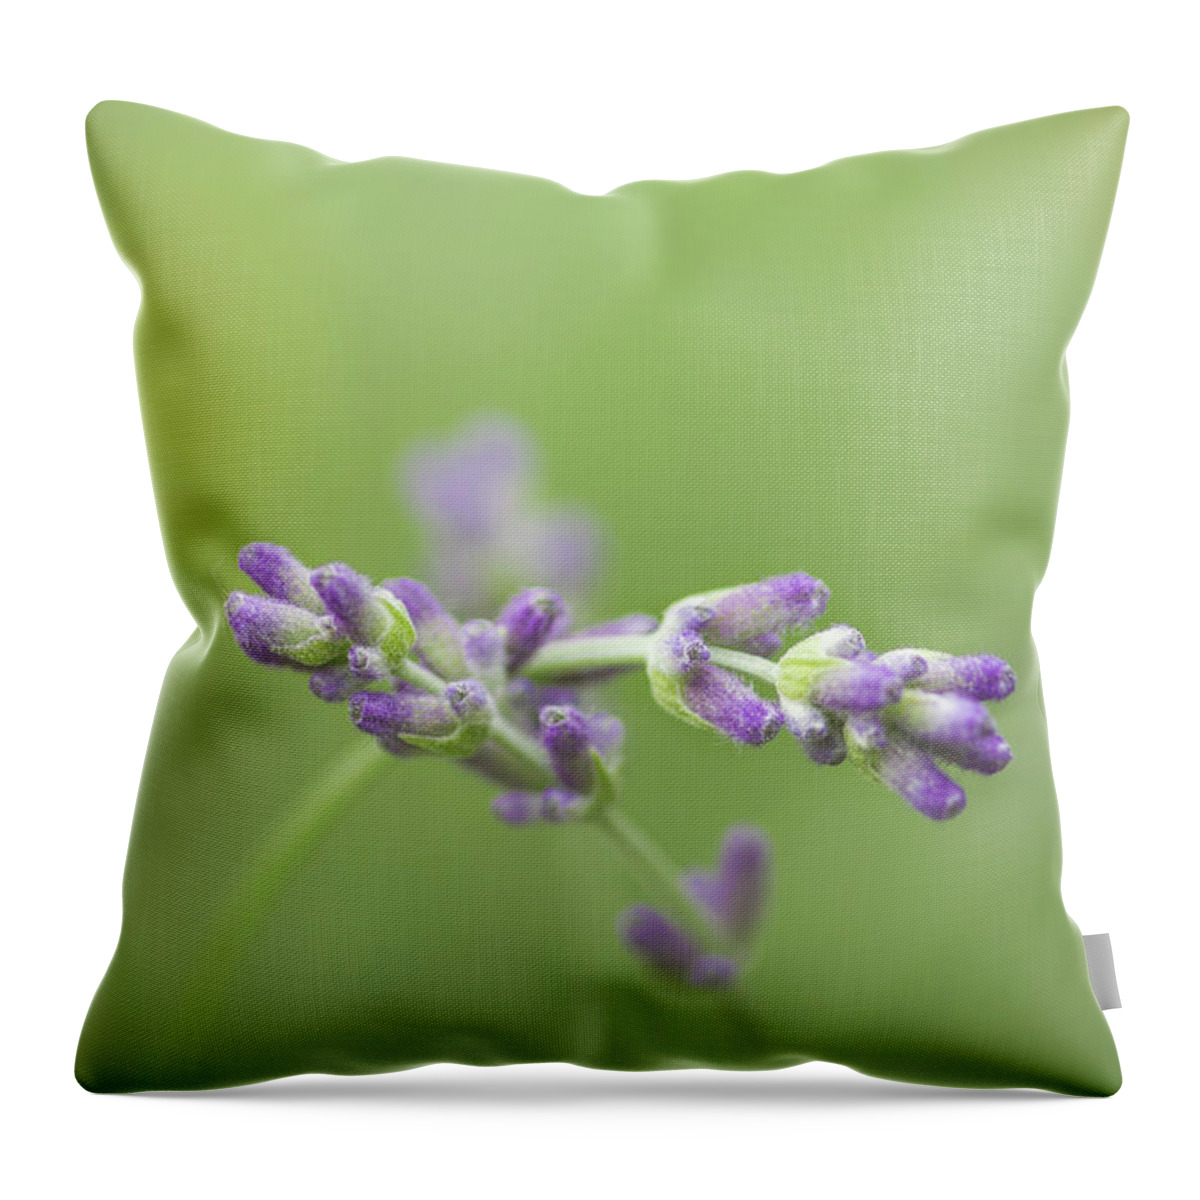  Throw Pillow featuring the photograph What Friends Are For by Peter Scott